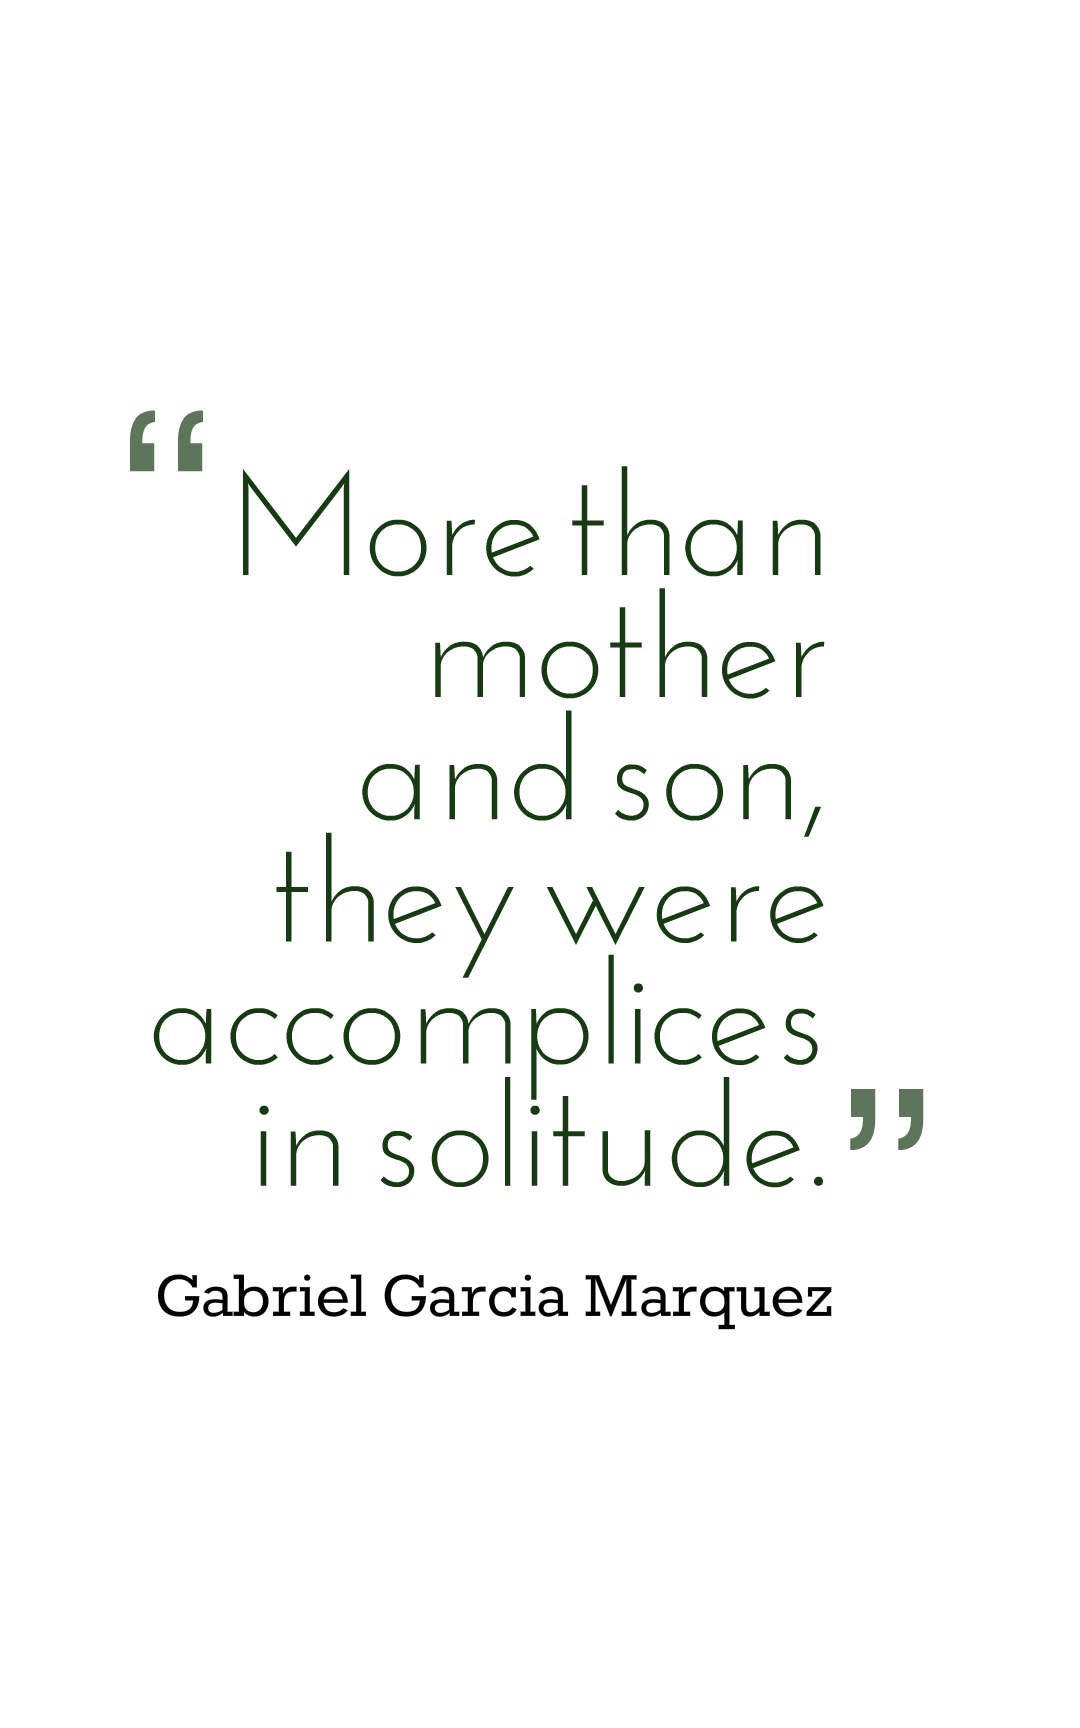 More than mother and son, they were accomplices in solitude.